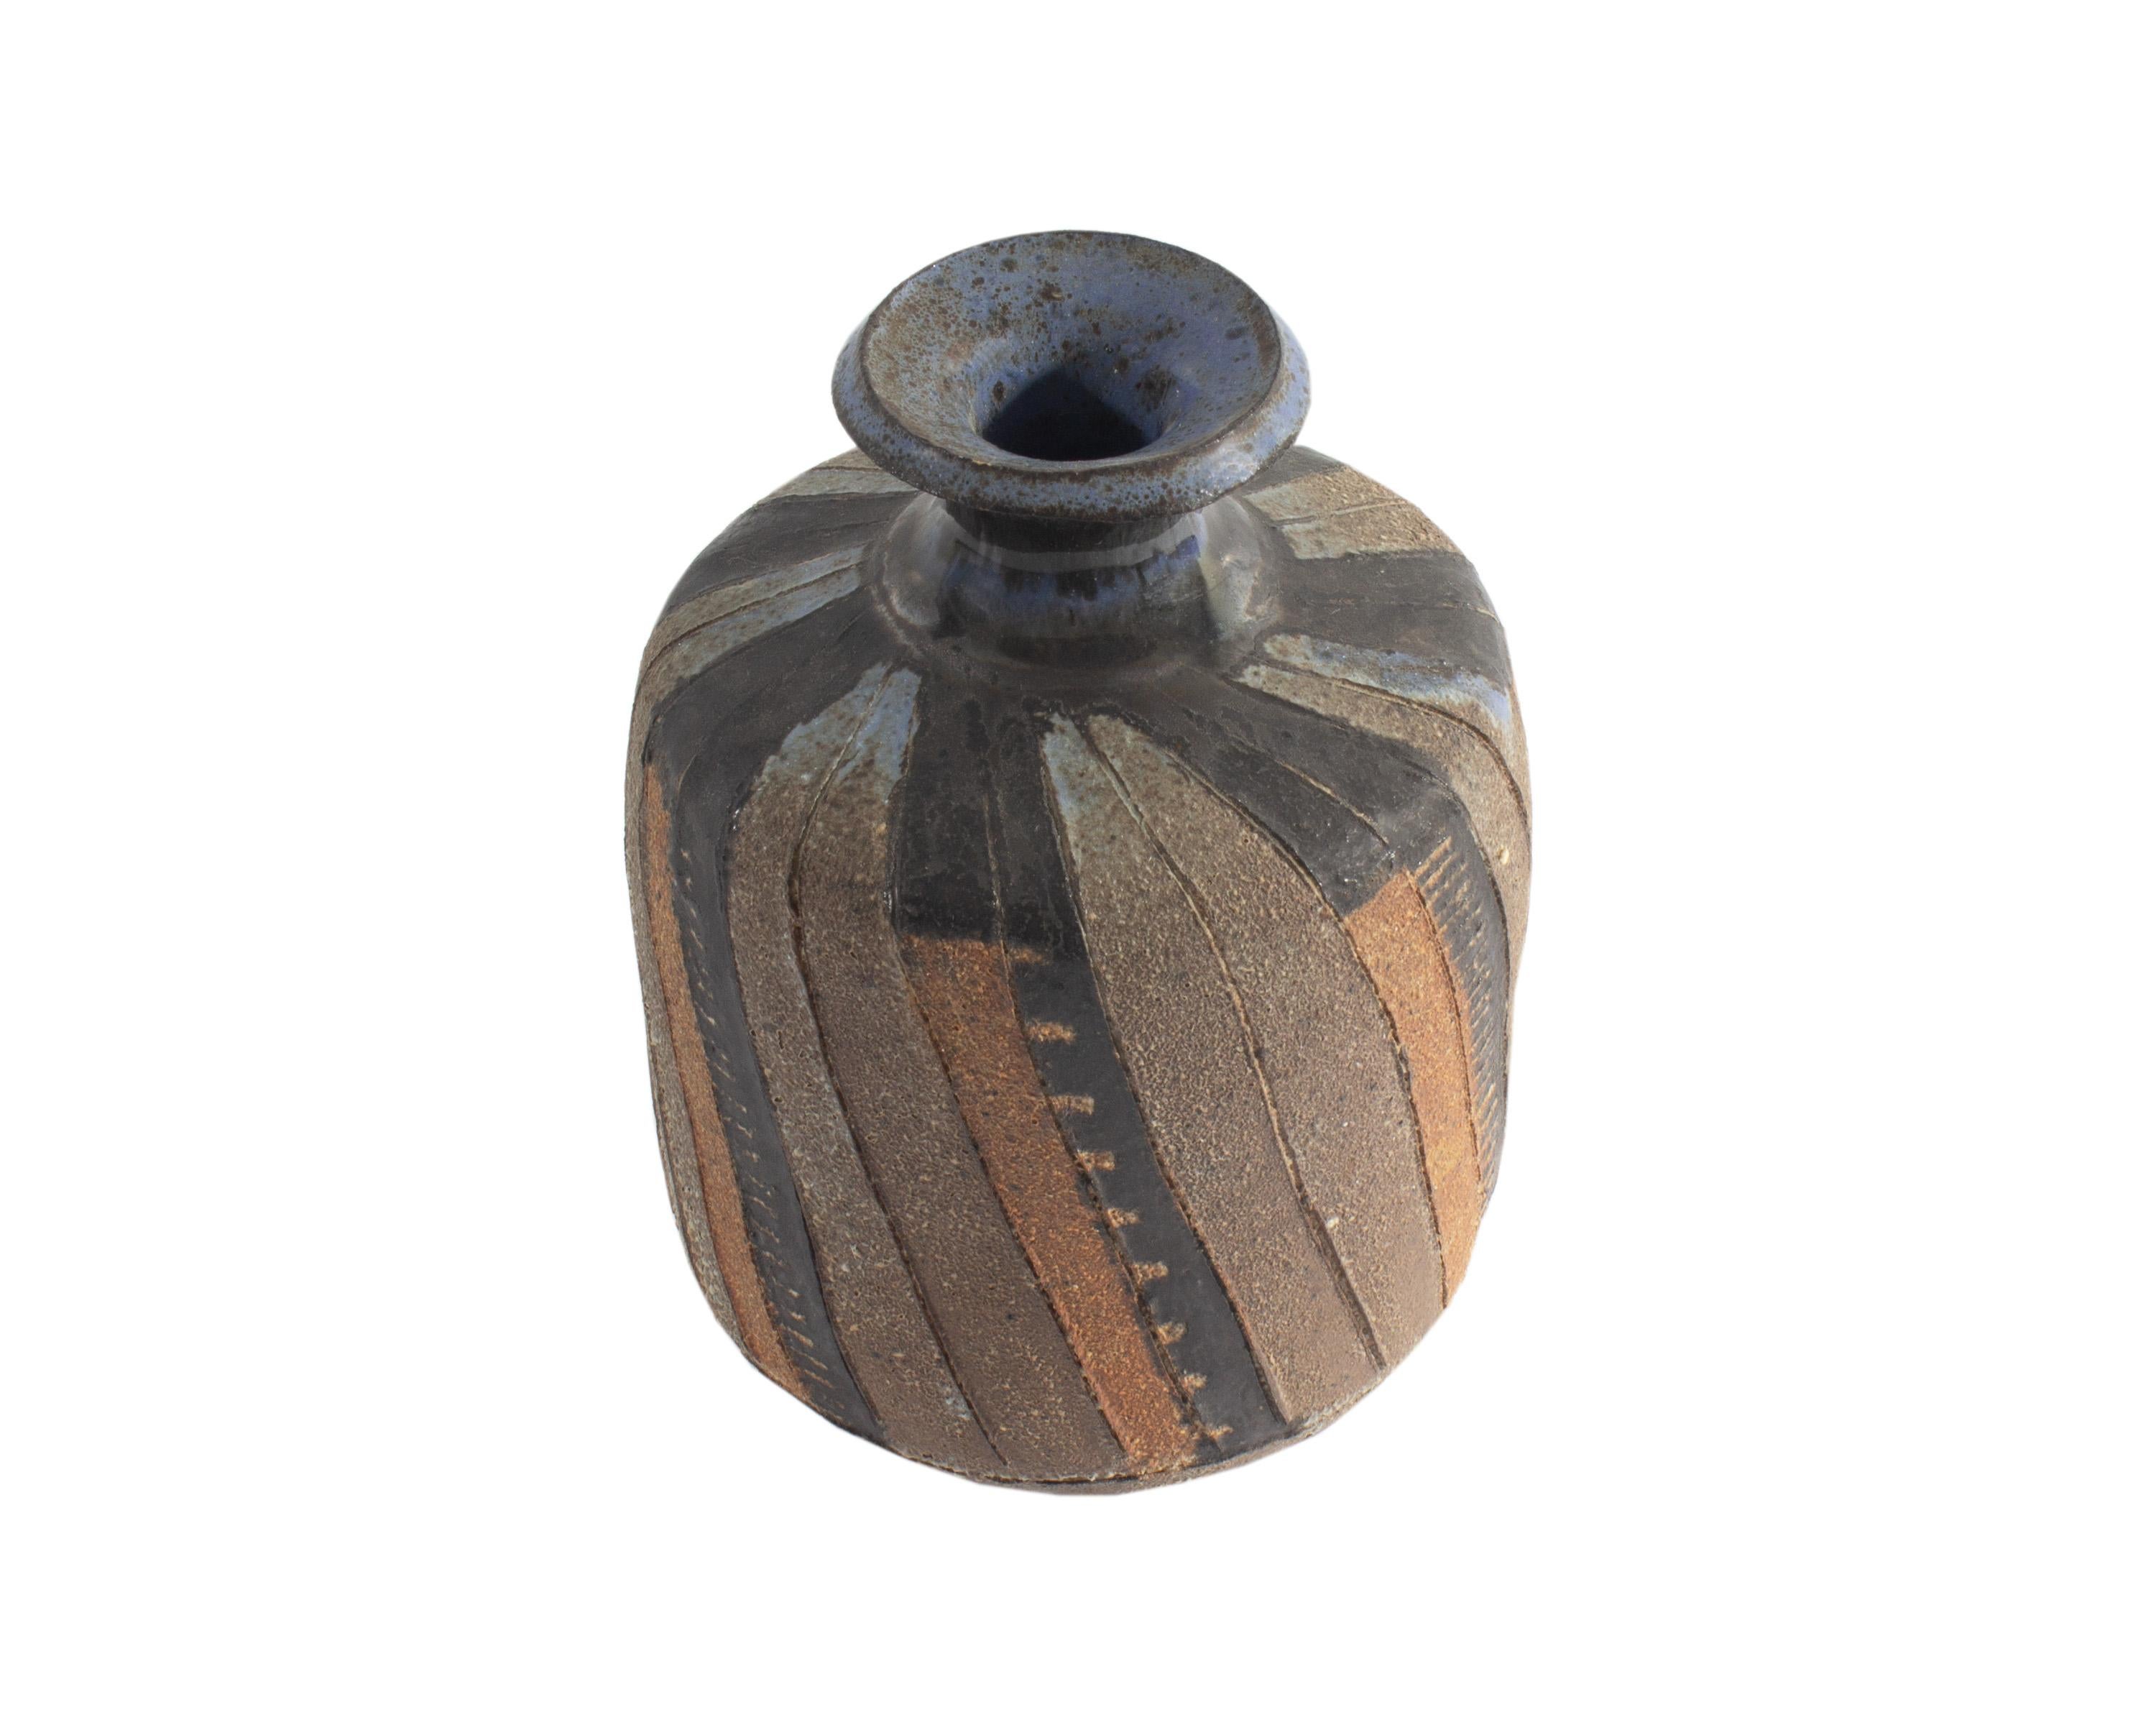 A Pond Farm studio pottery vase by American Bauhaus-trained artist Marguerite Wildenhain (1896-1985). This vessel has vertical stripes, alternating in pairs of unglazed and terracotta and black sections. At the neck and opening of the vase, blue